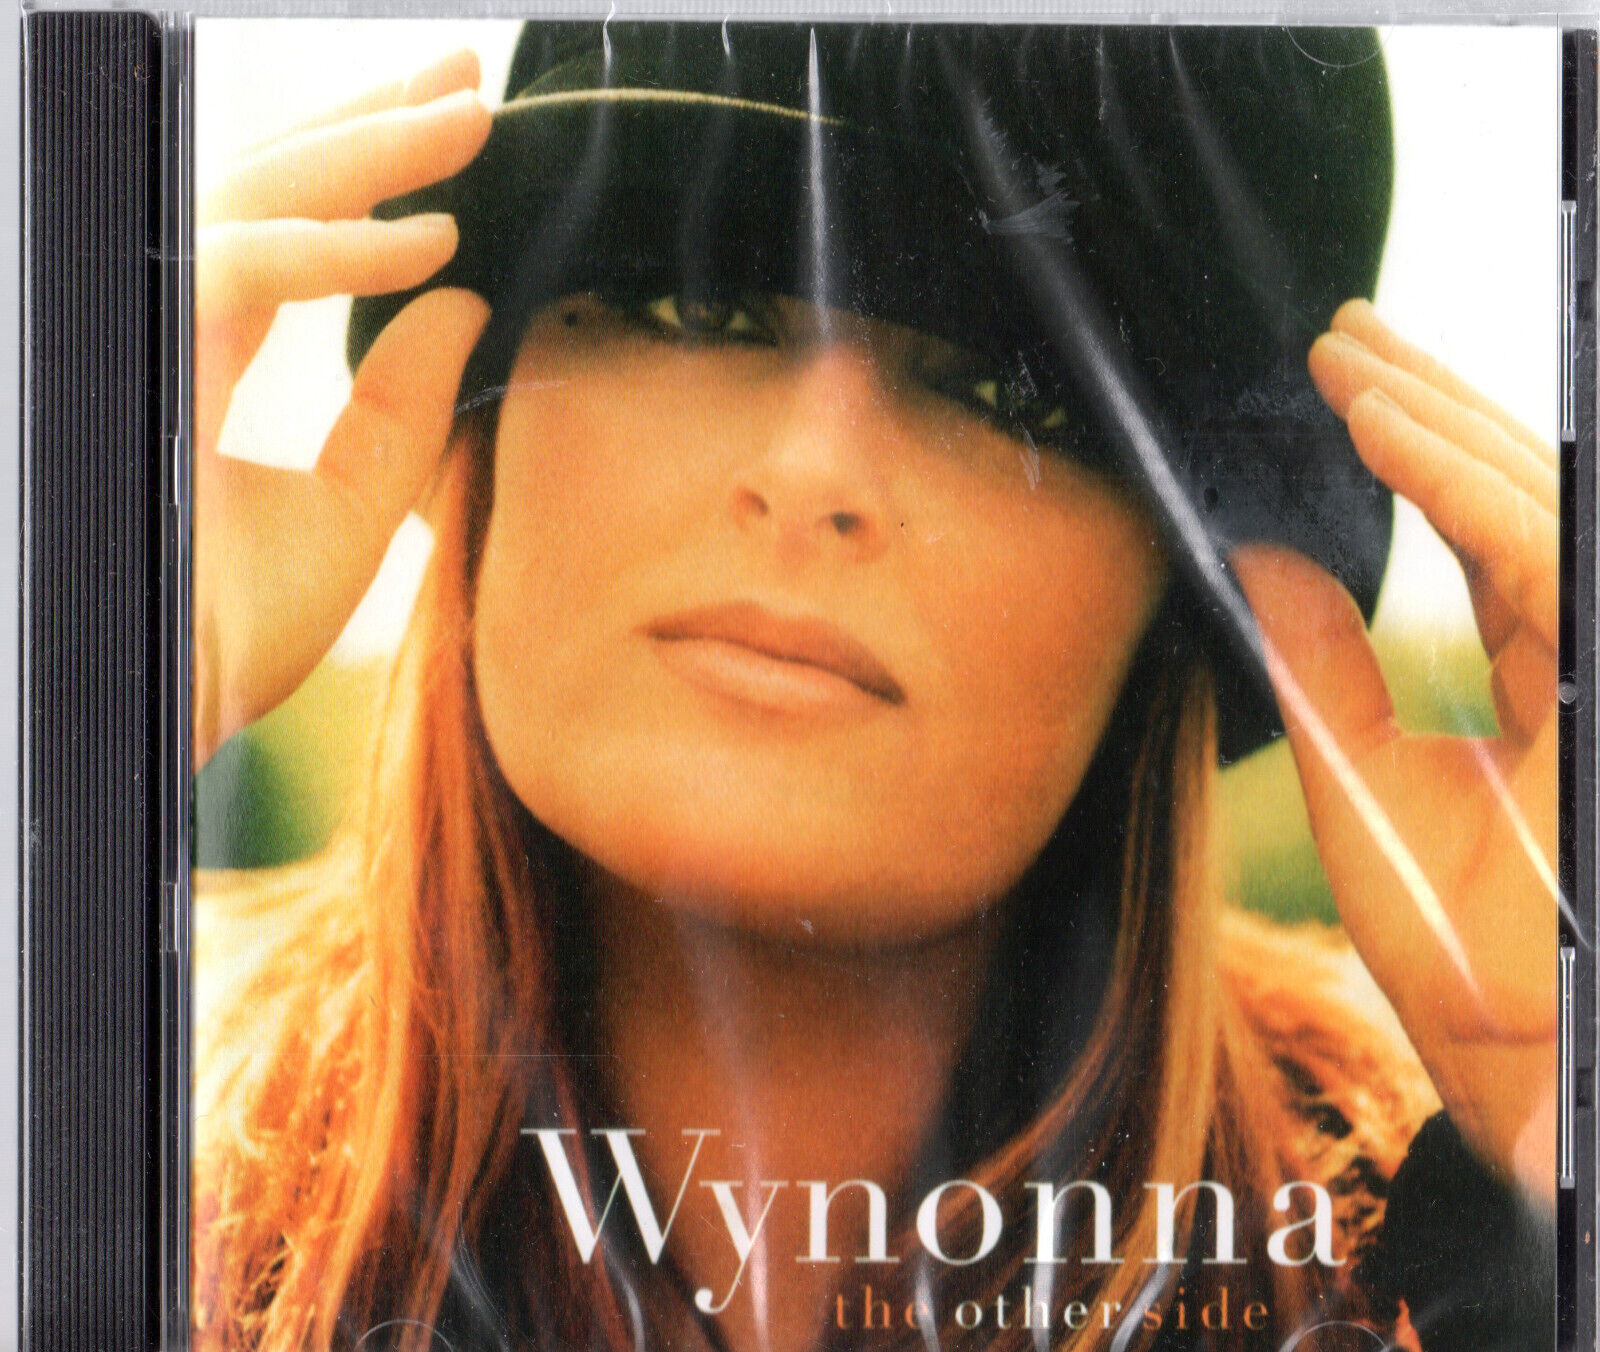 Other Side, The - Music CD - Wynonna -  2011-07-21 - NEW & SEALED.  FAST SHIPPNG